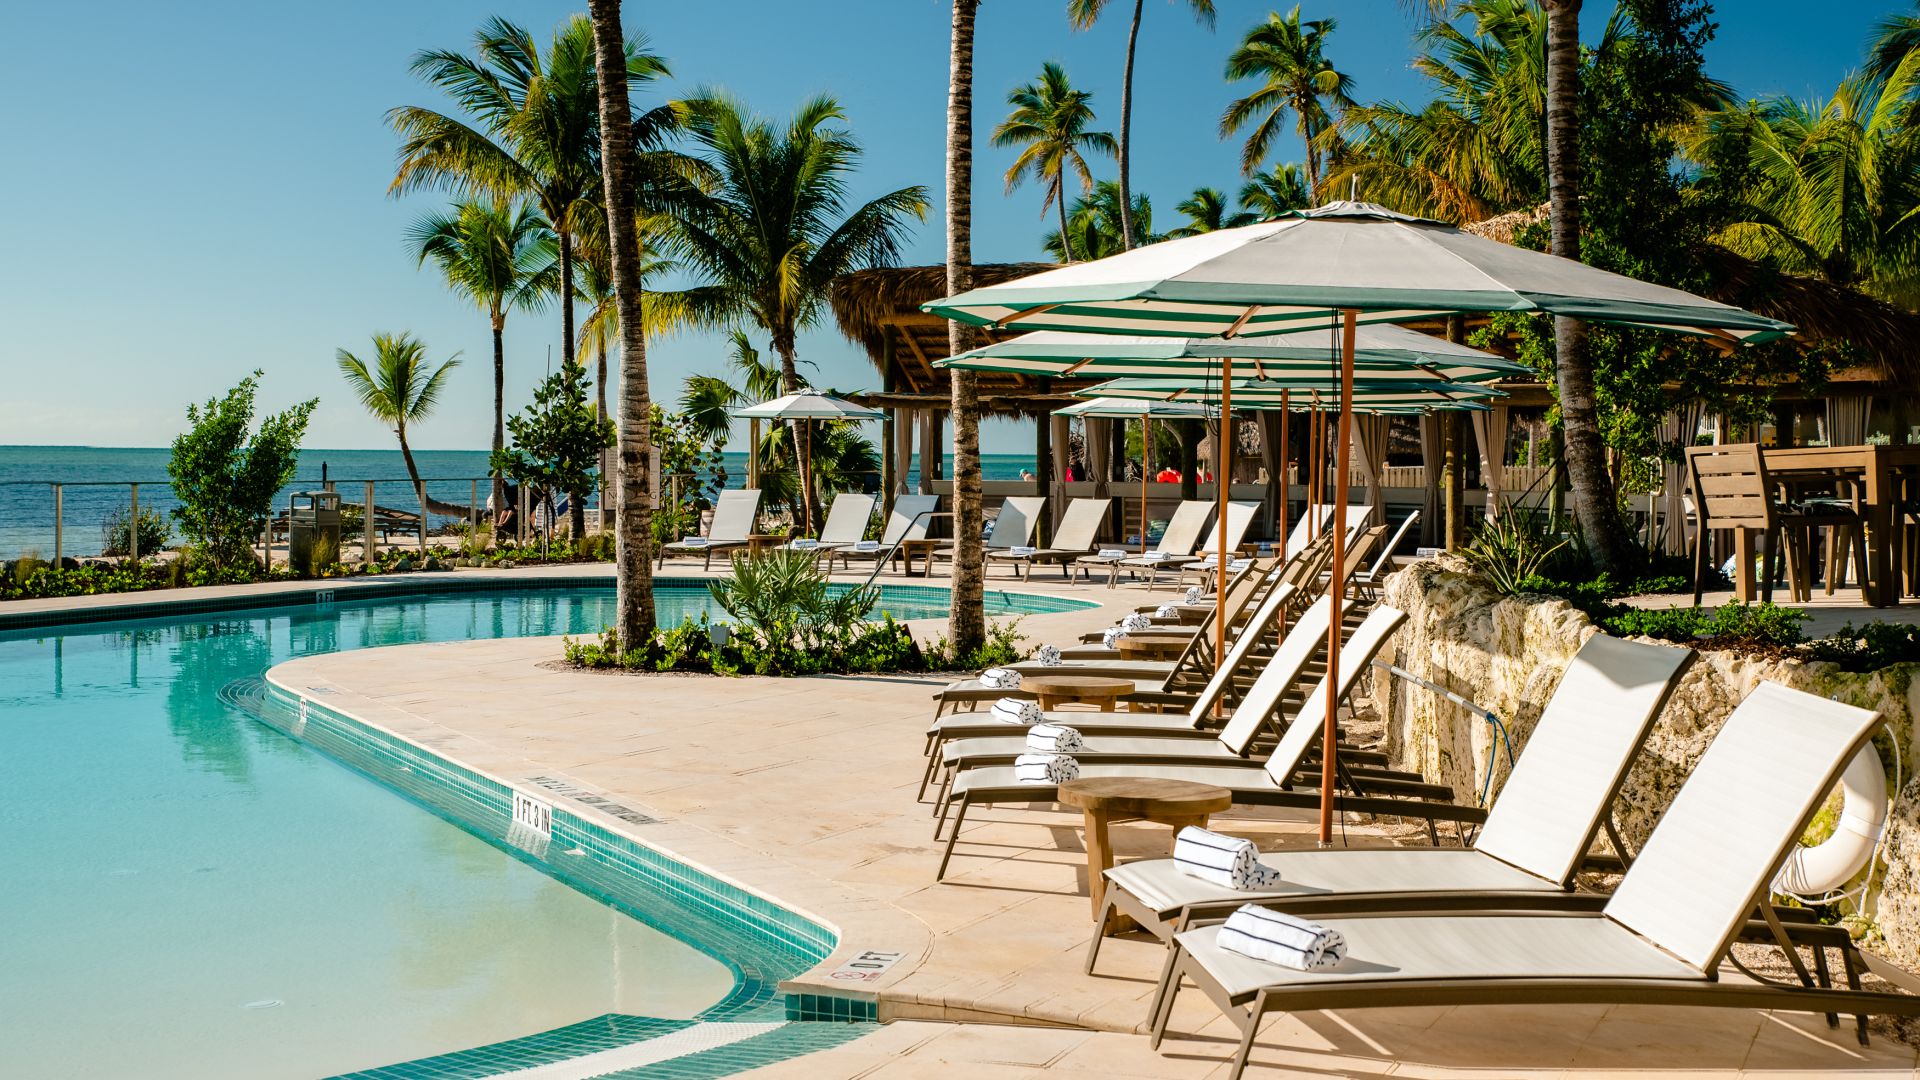 A Pool With Lounge Chairs And Umbrellas By A Beach